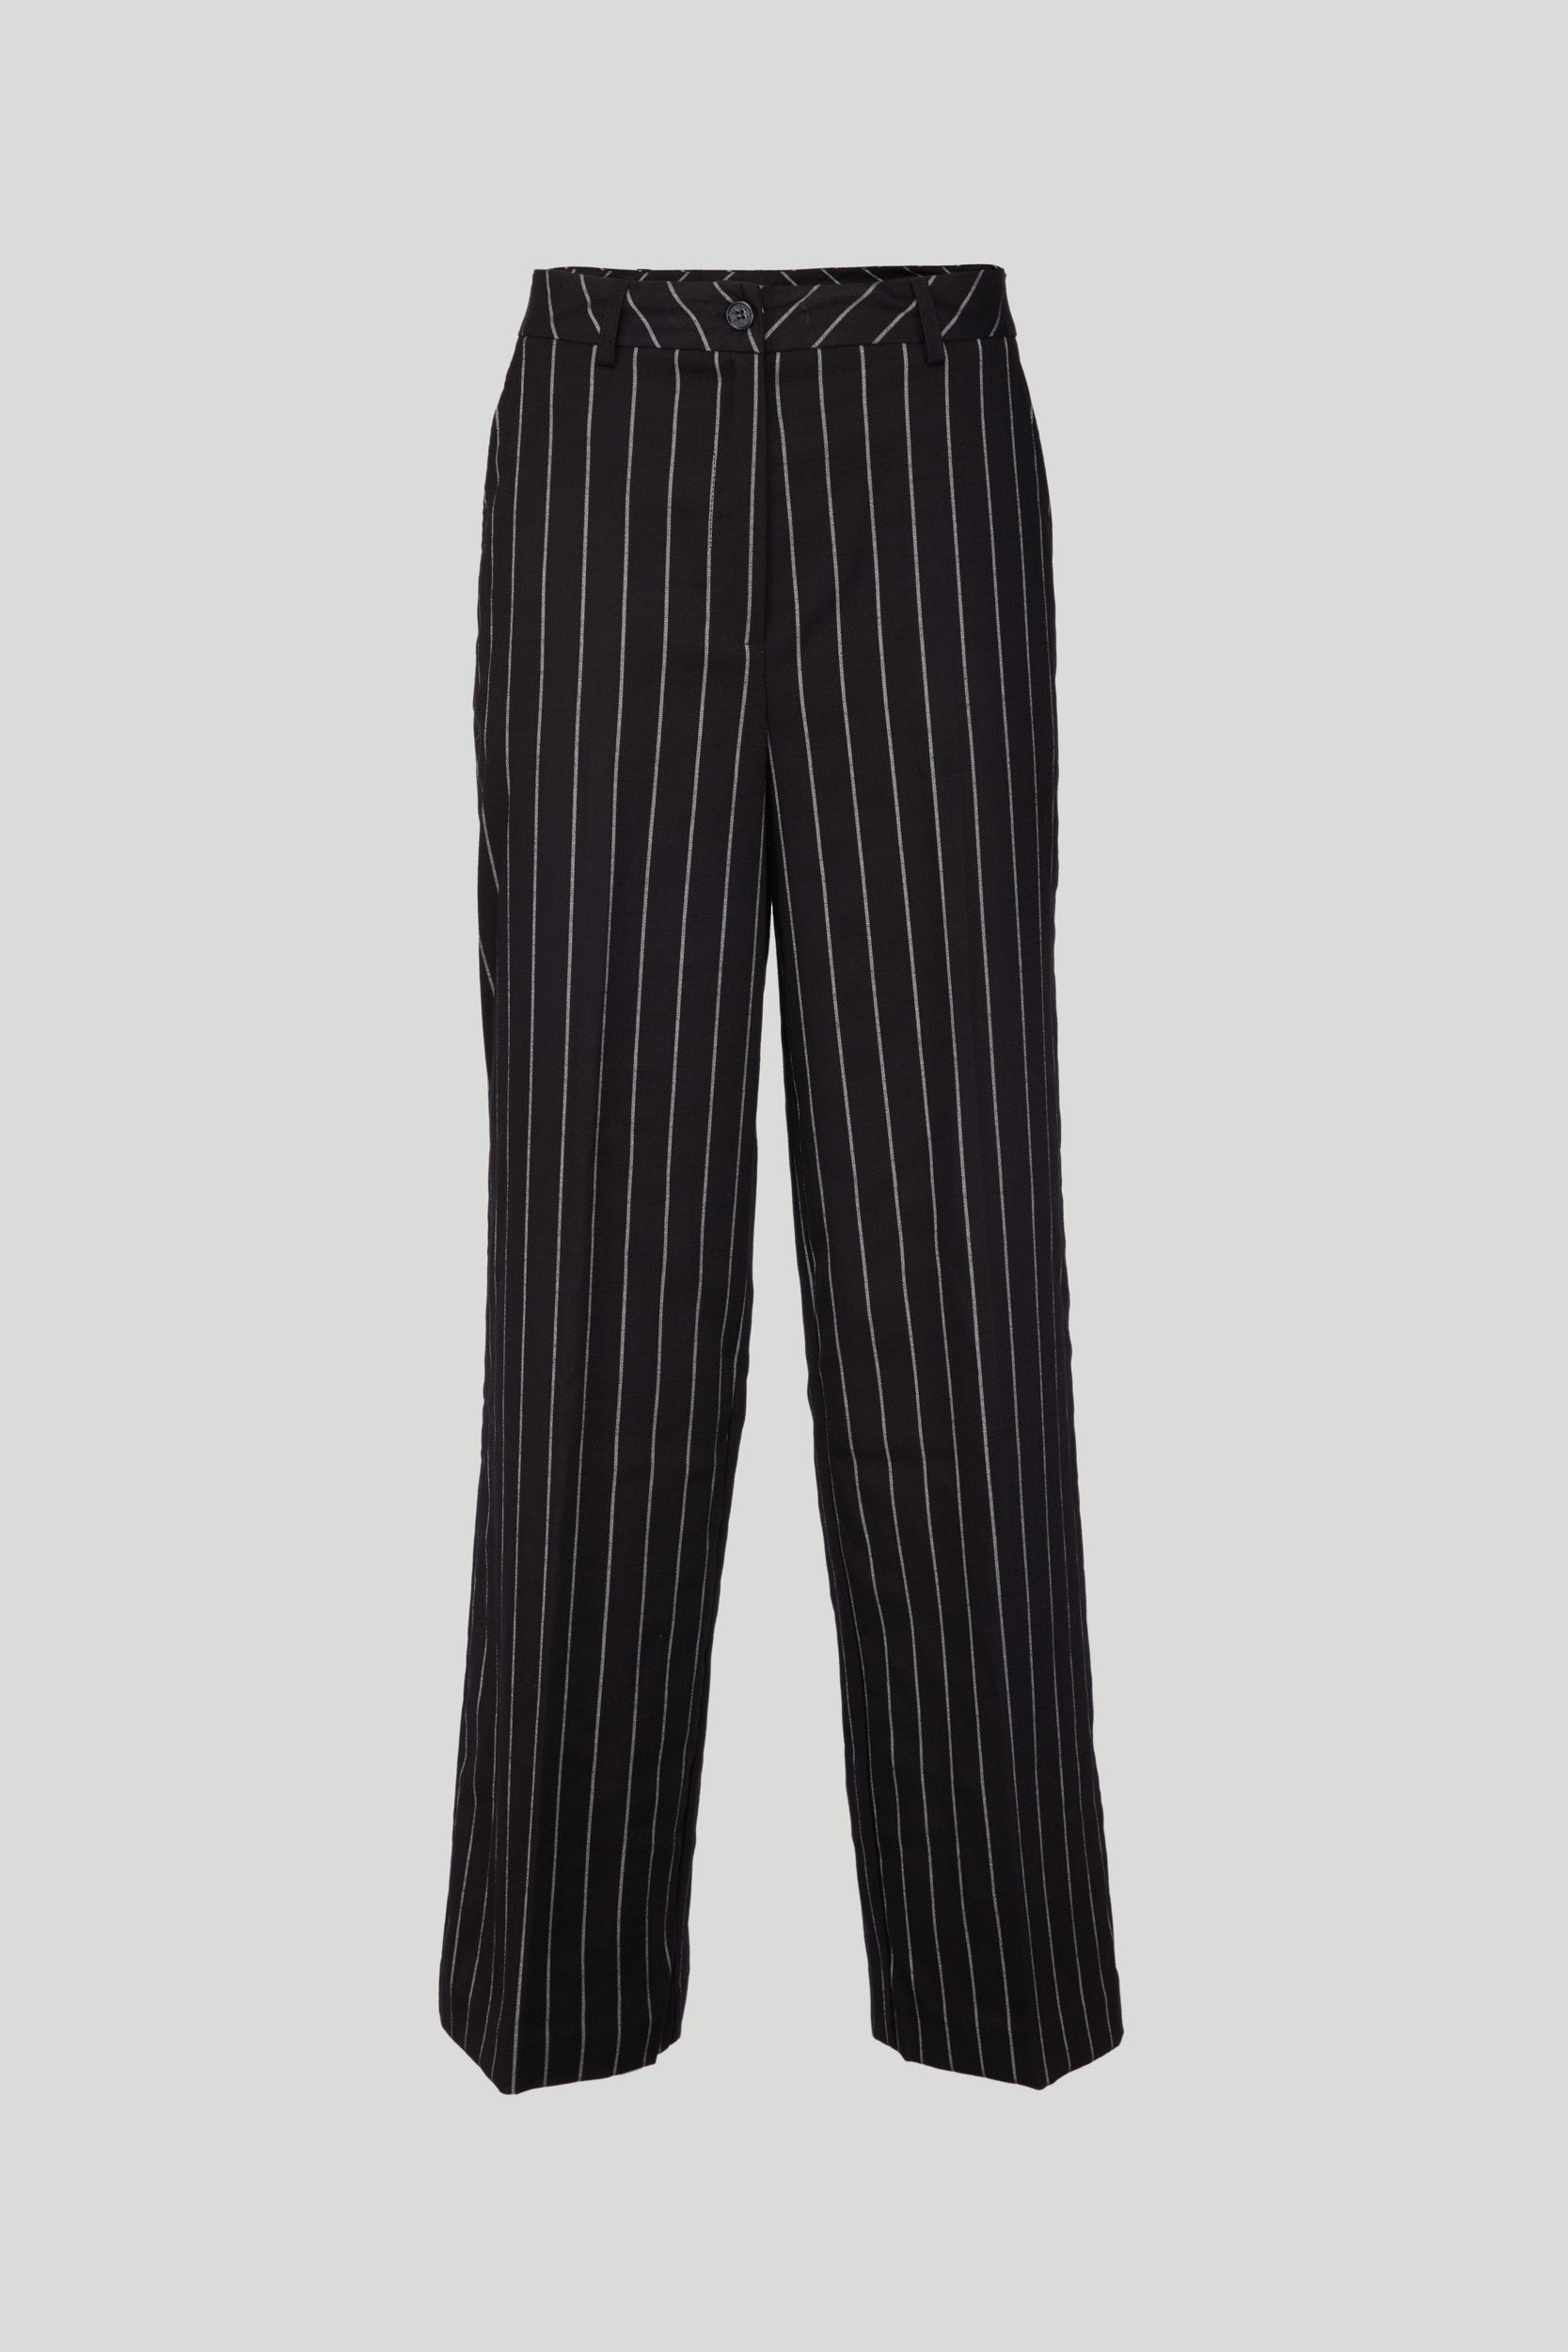 MY TWIN TWINSET Black Pinstriped Trousers